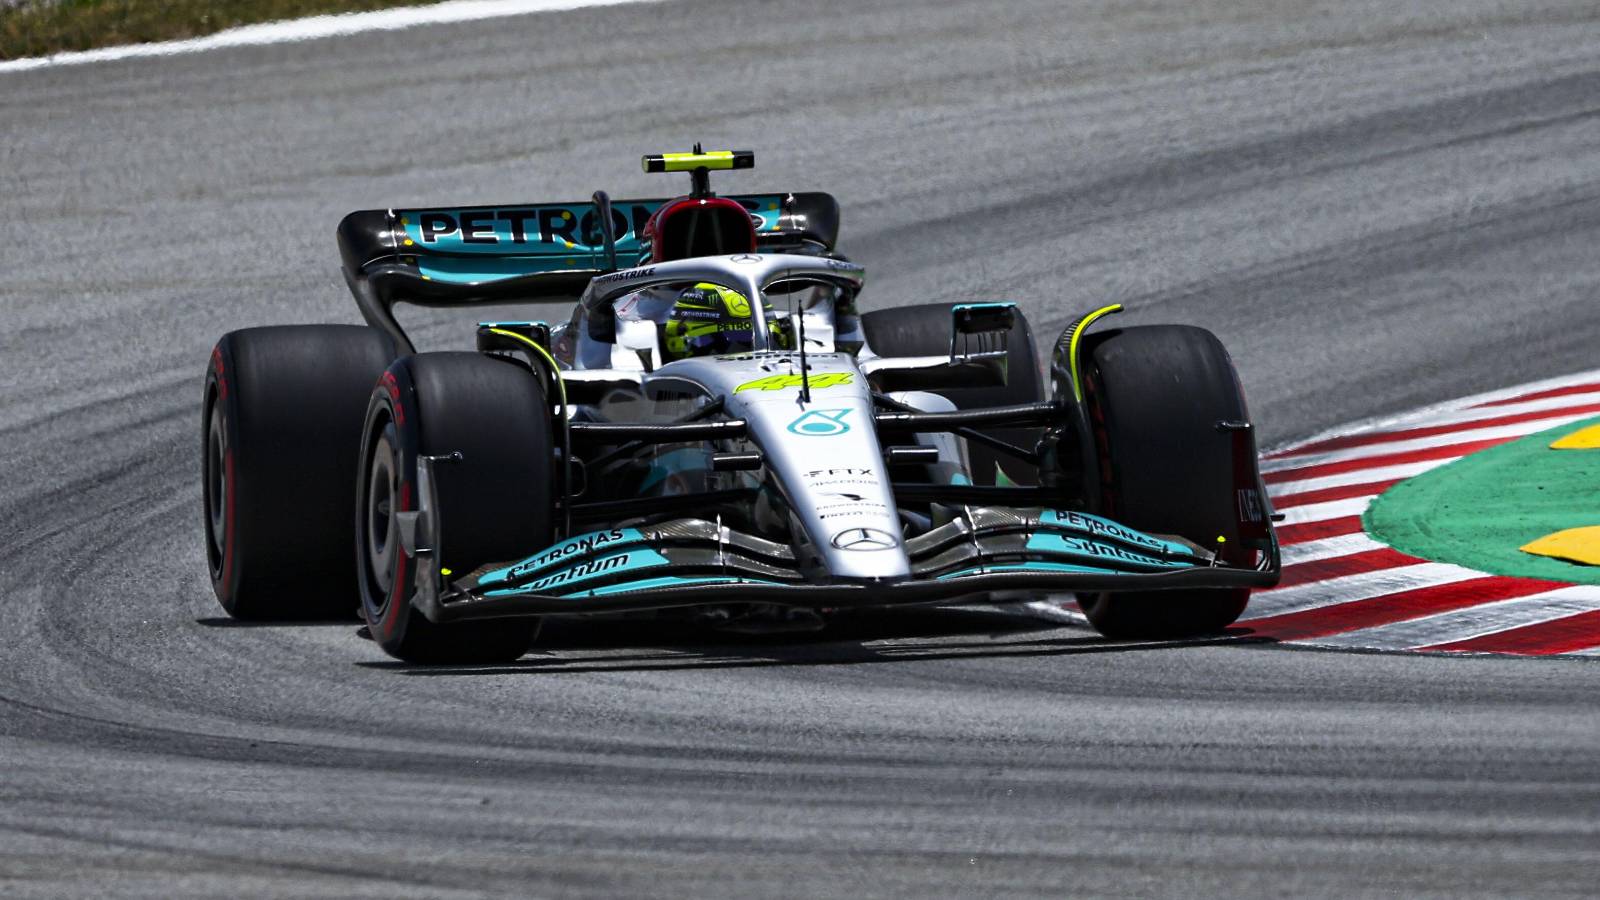 Lewis Hamilton, Mercedes, in action. Spain, May 2022.